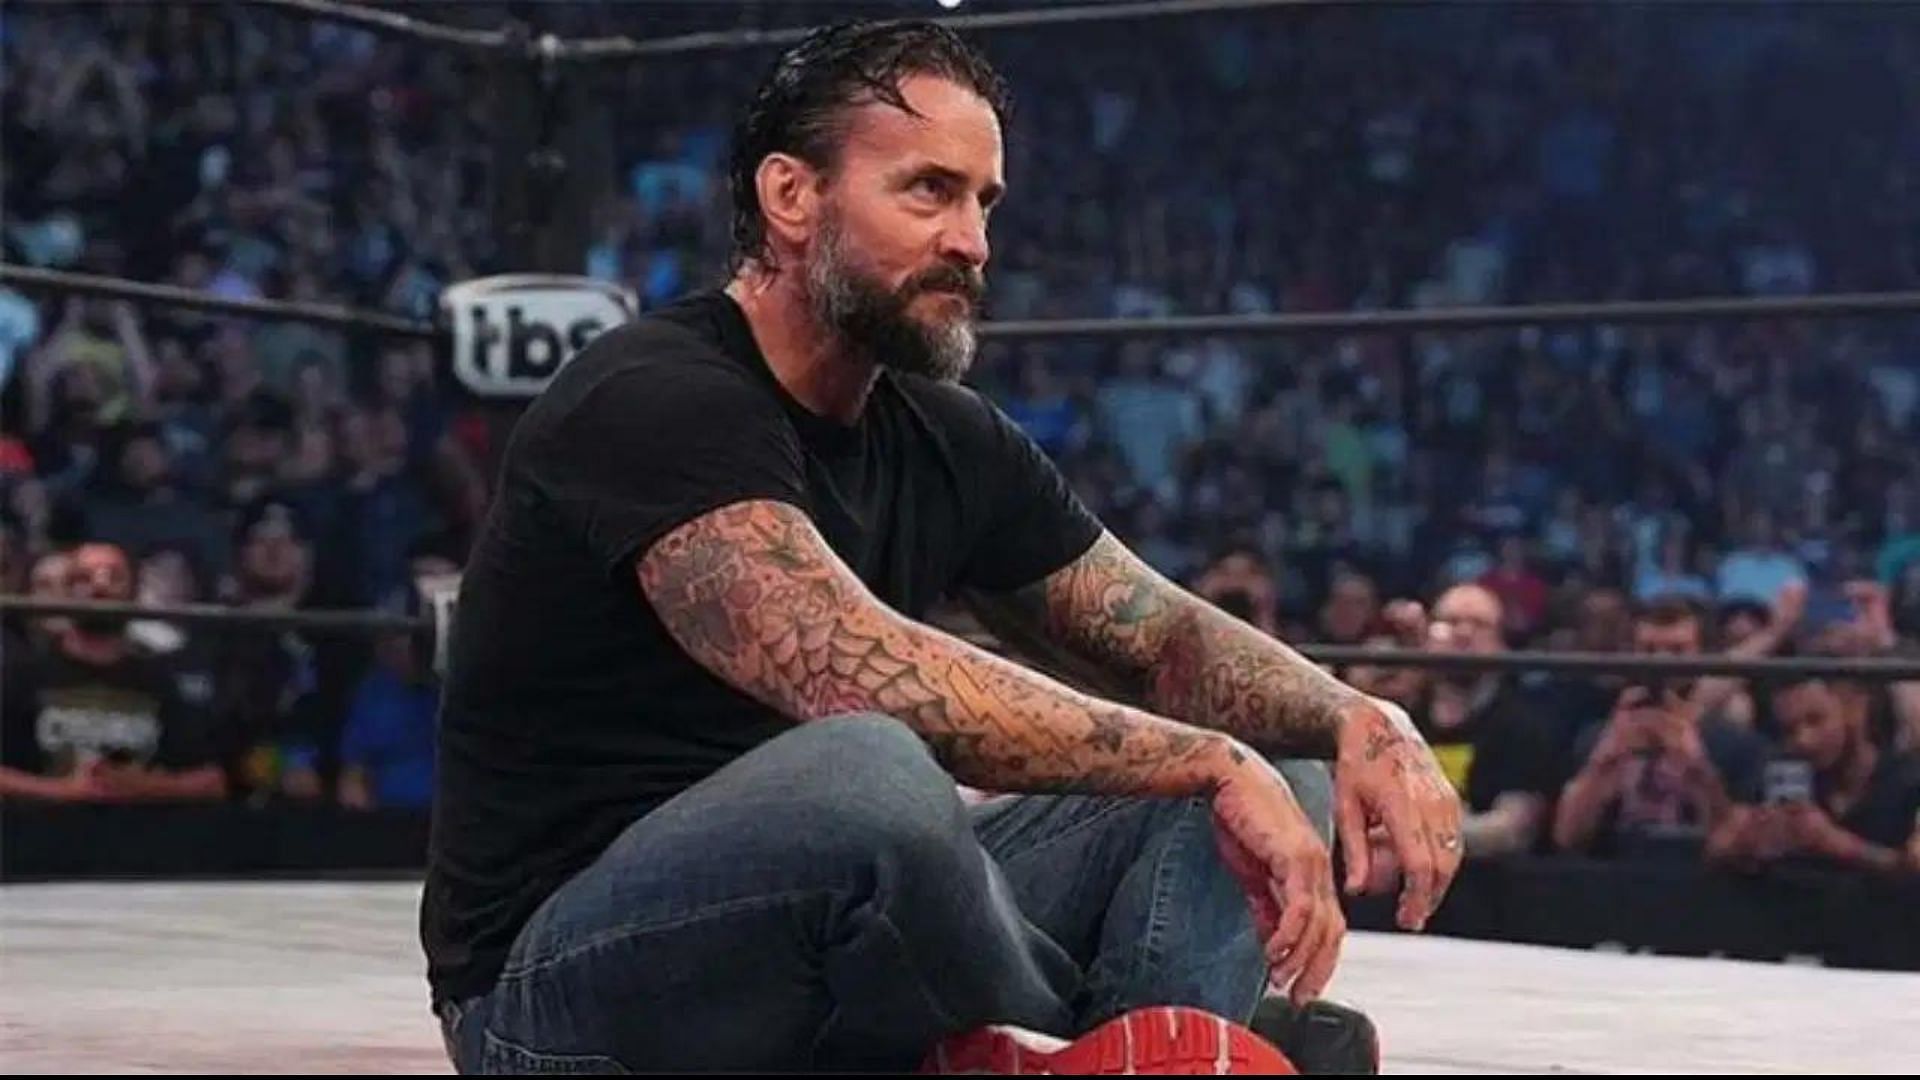 CM Punk was a former AEW World Champion who is now signed with WWE